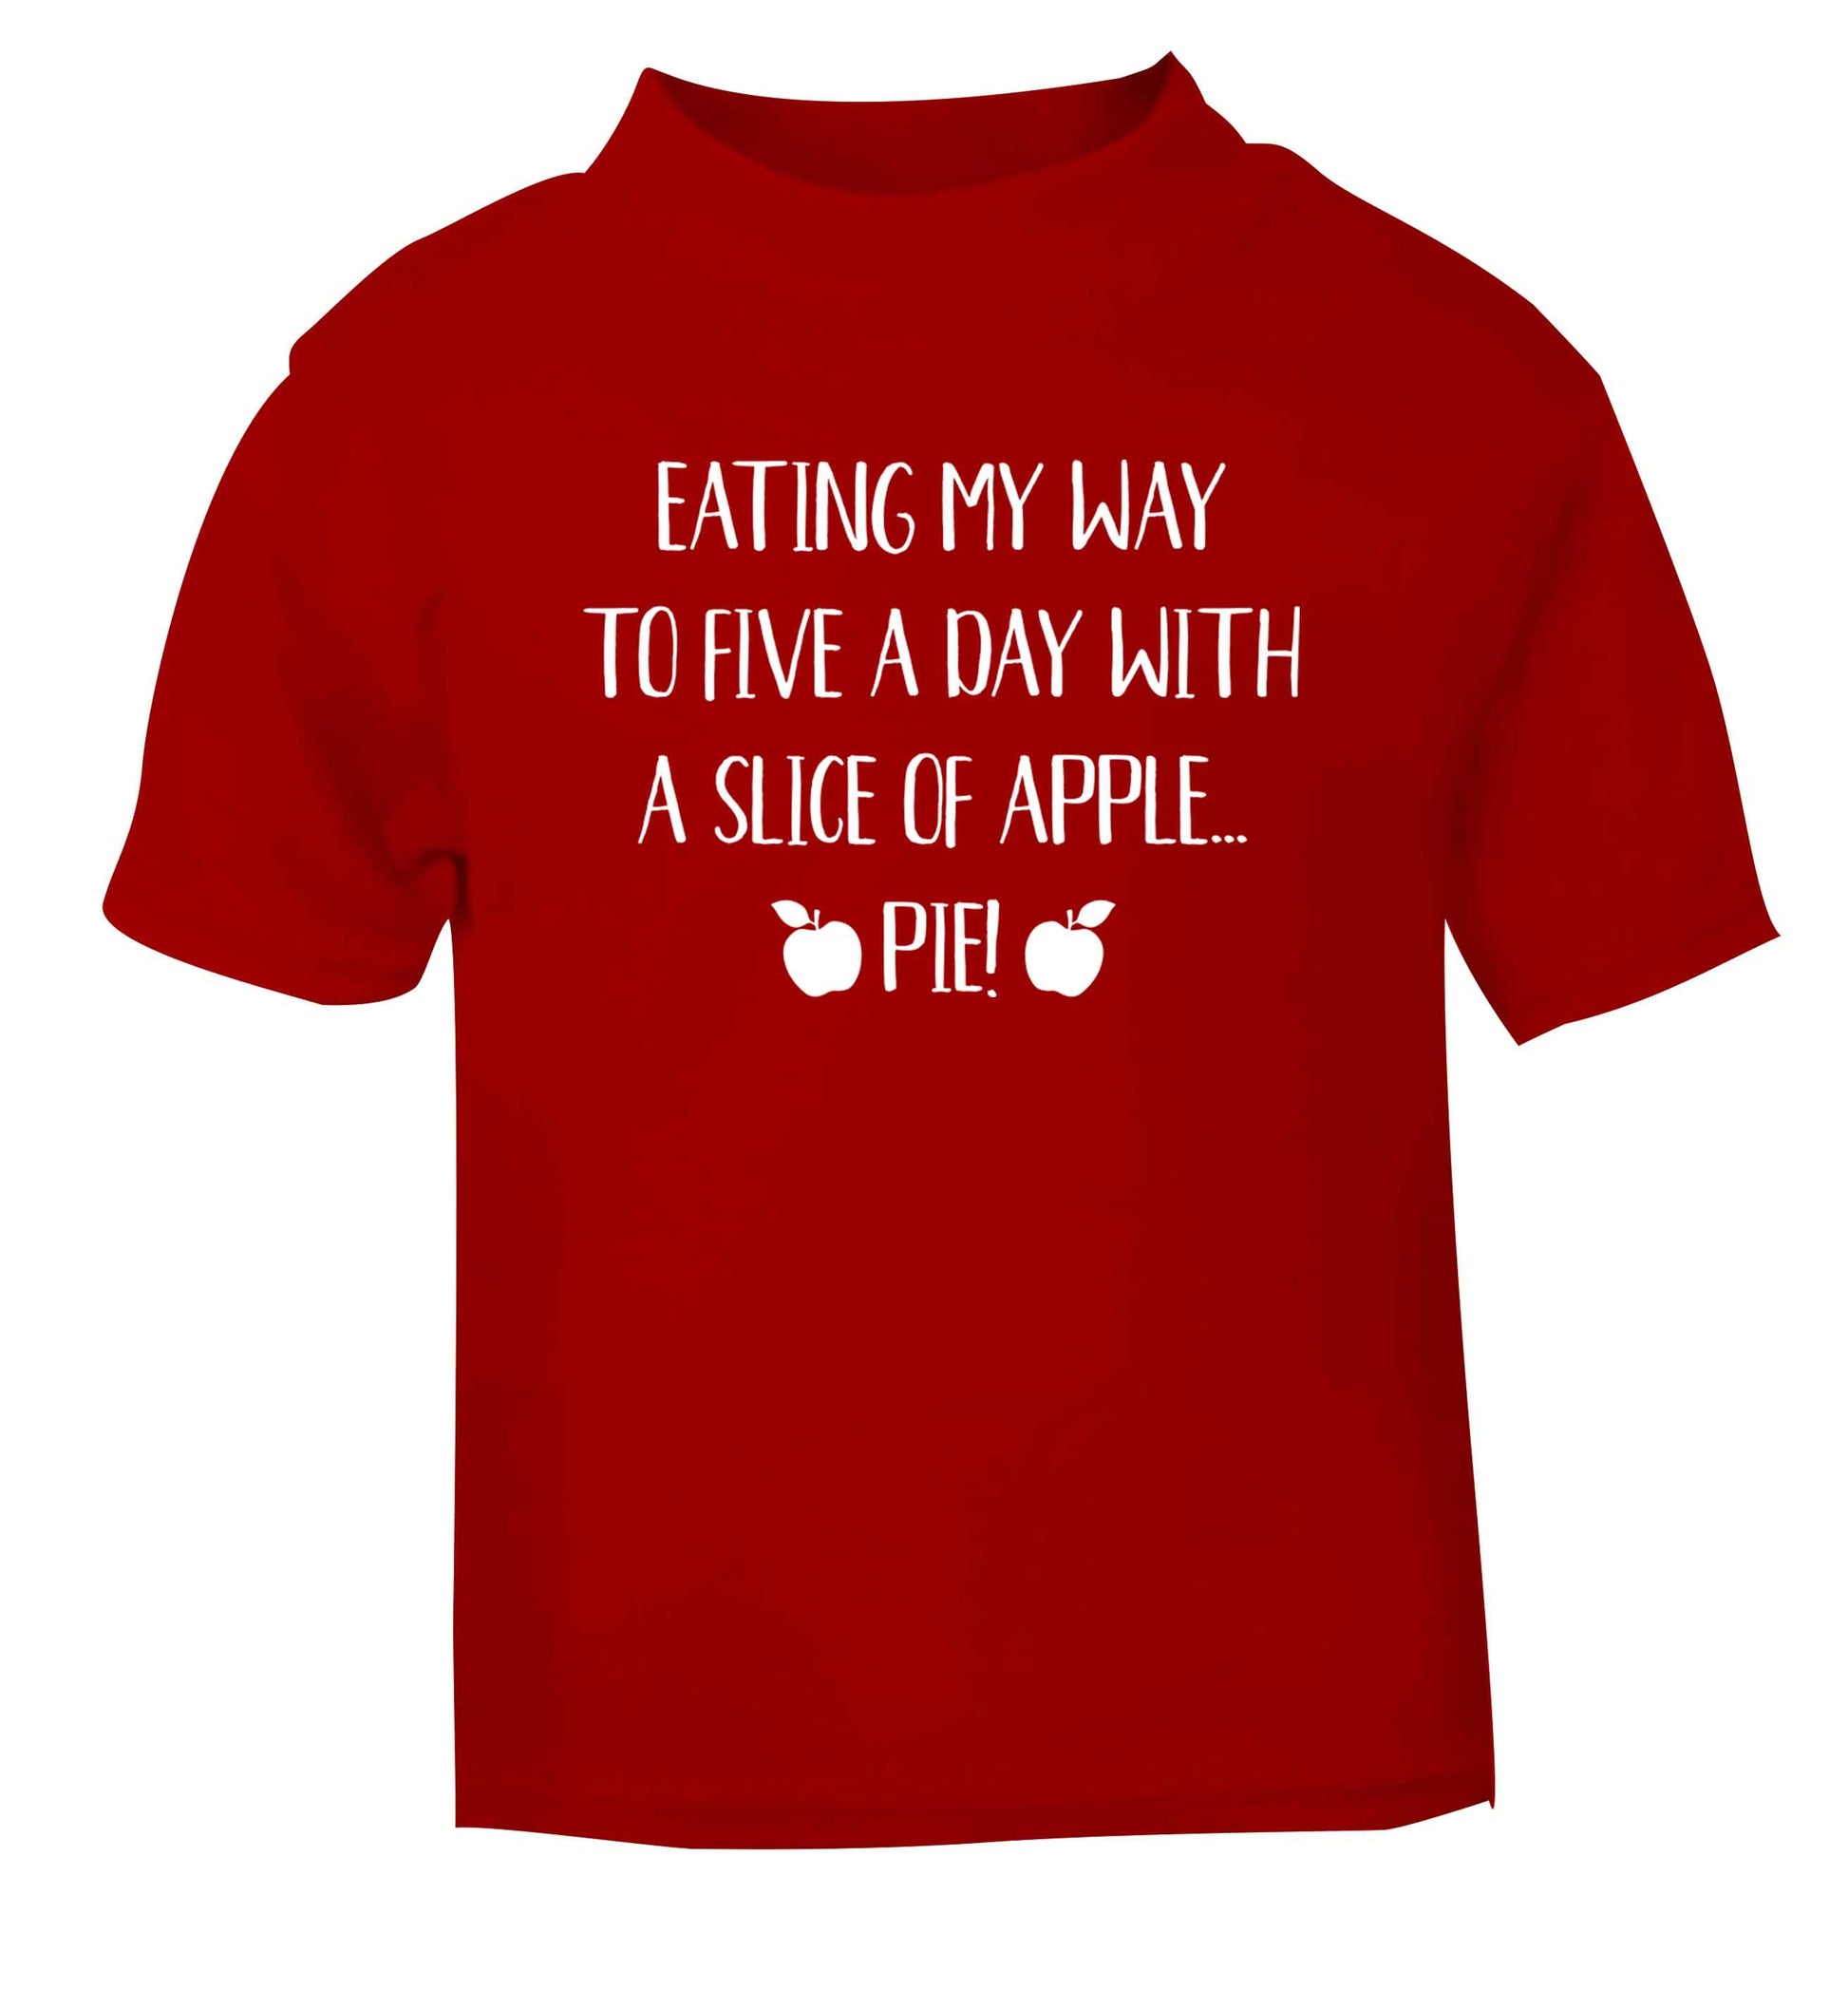 Eating my way to five a day with a slice of apple pie red Baby Toddler Tshirt 2 Years